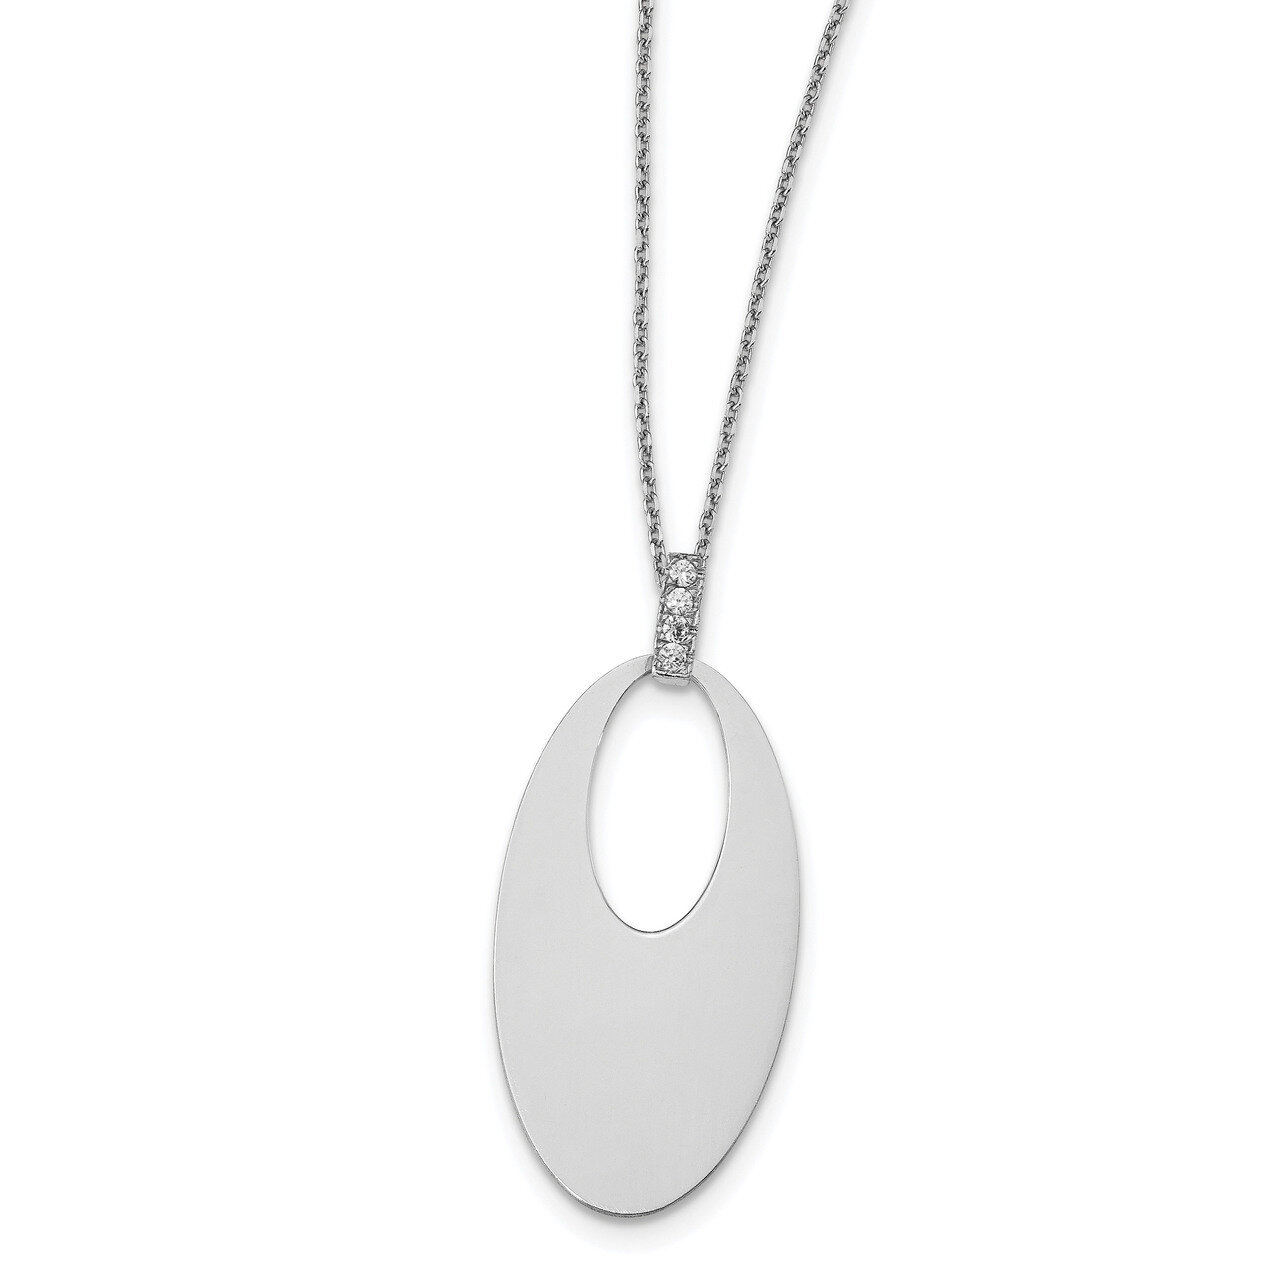 Crystal Oval with 1 inch Extender Necklace 16.5 Inch Sterling Silver Polished HB-QLF949-16.5